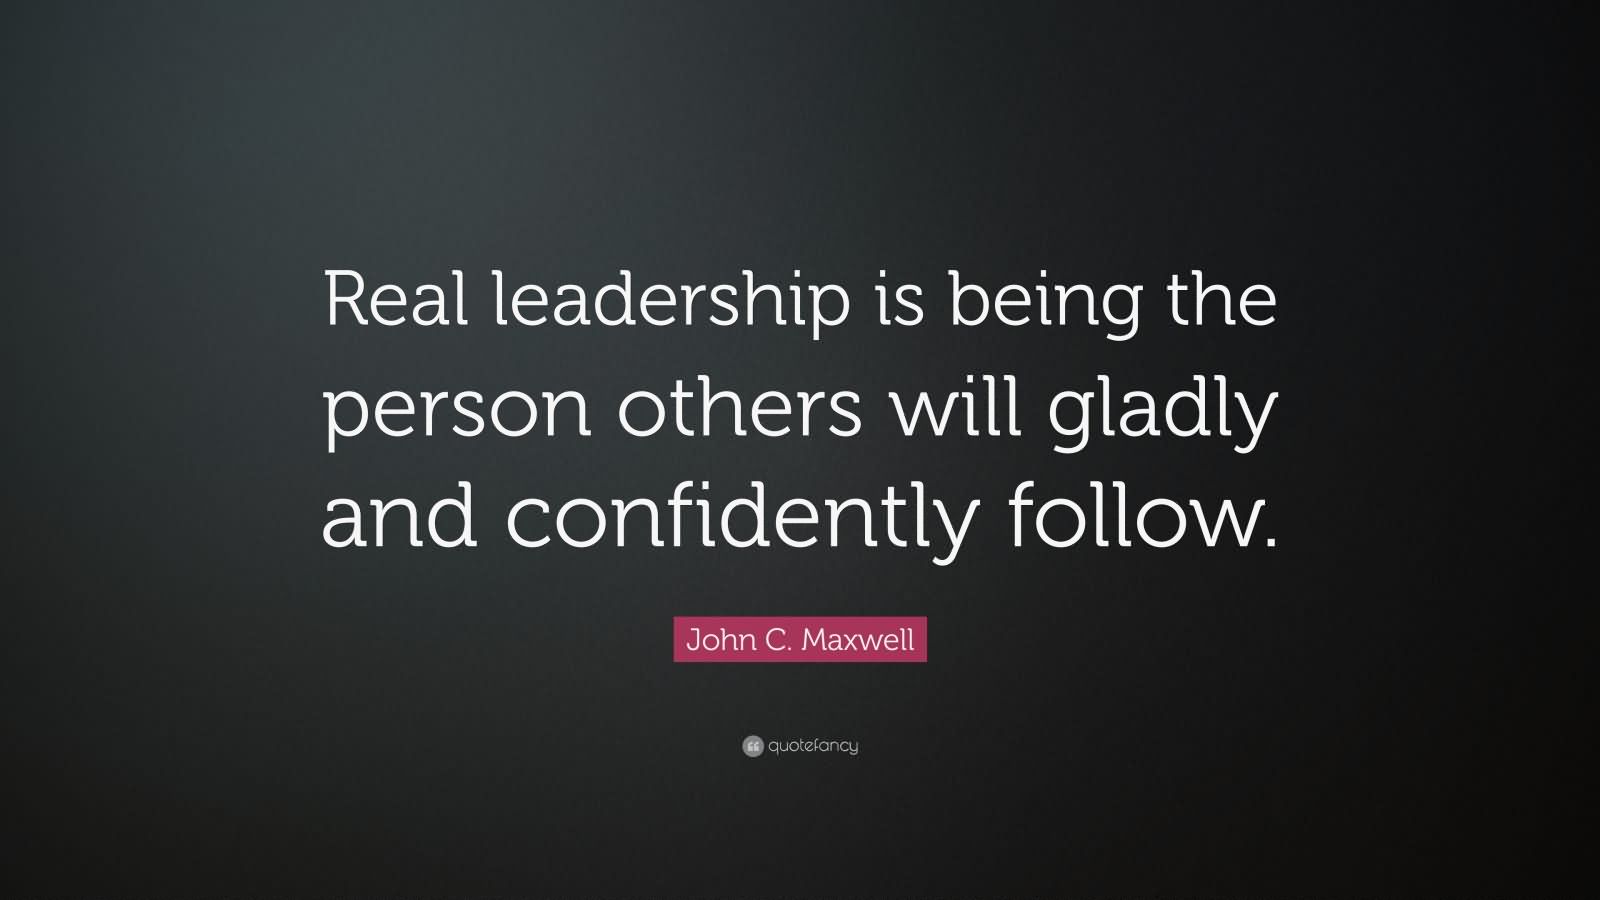 Real leadership is being the person others will gladly and confidently follow. - John C. Maxwell